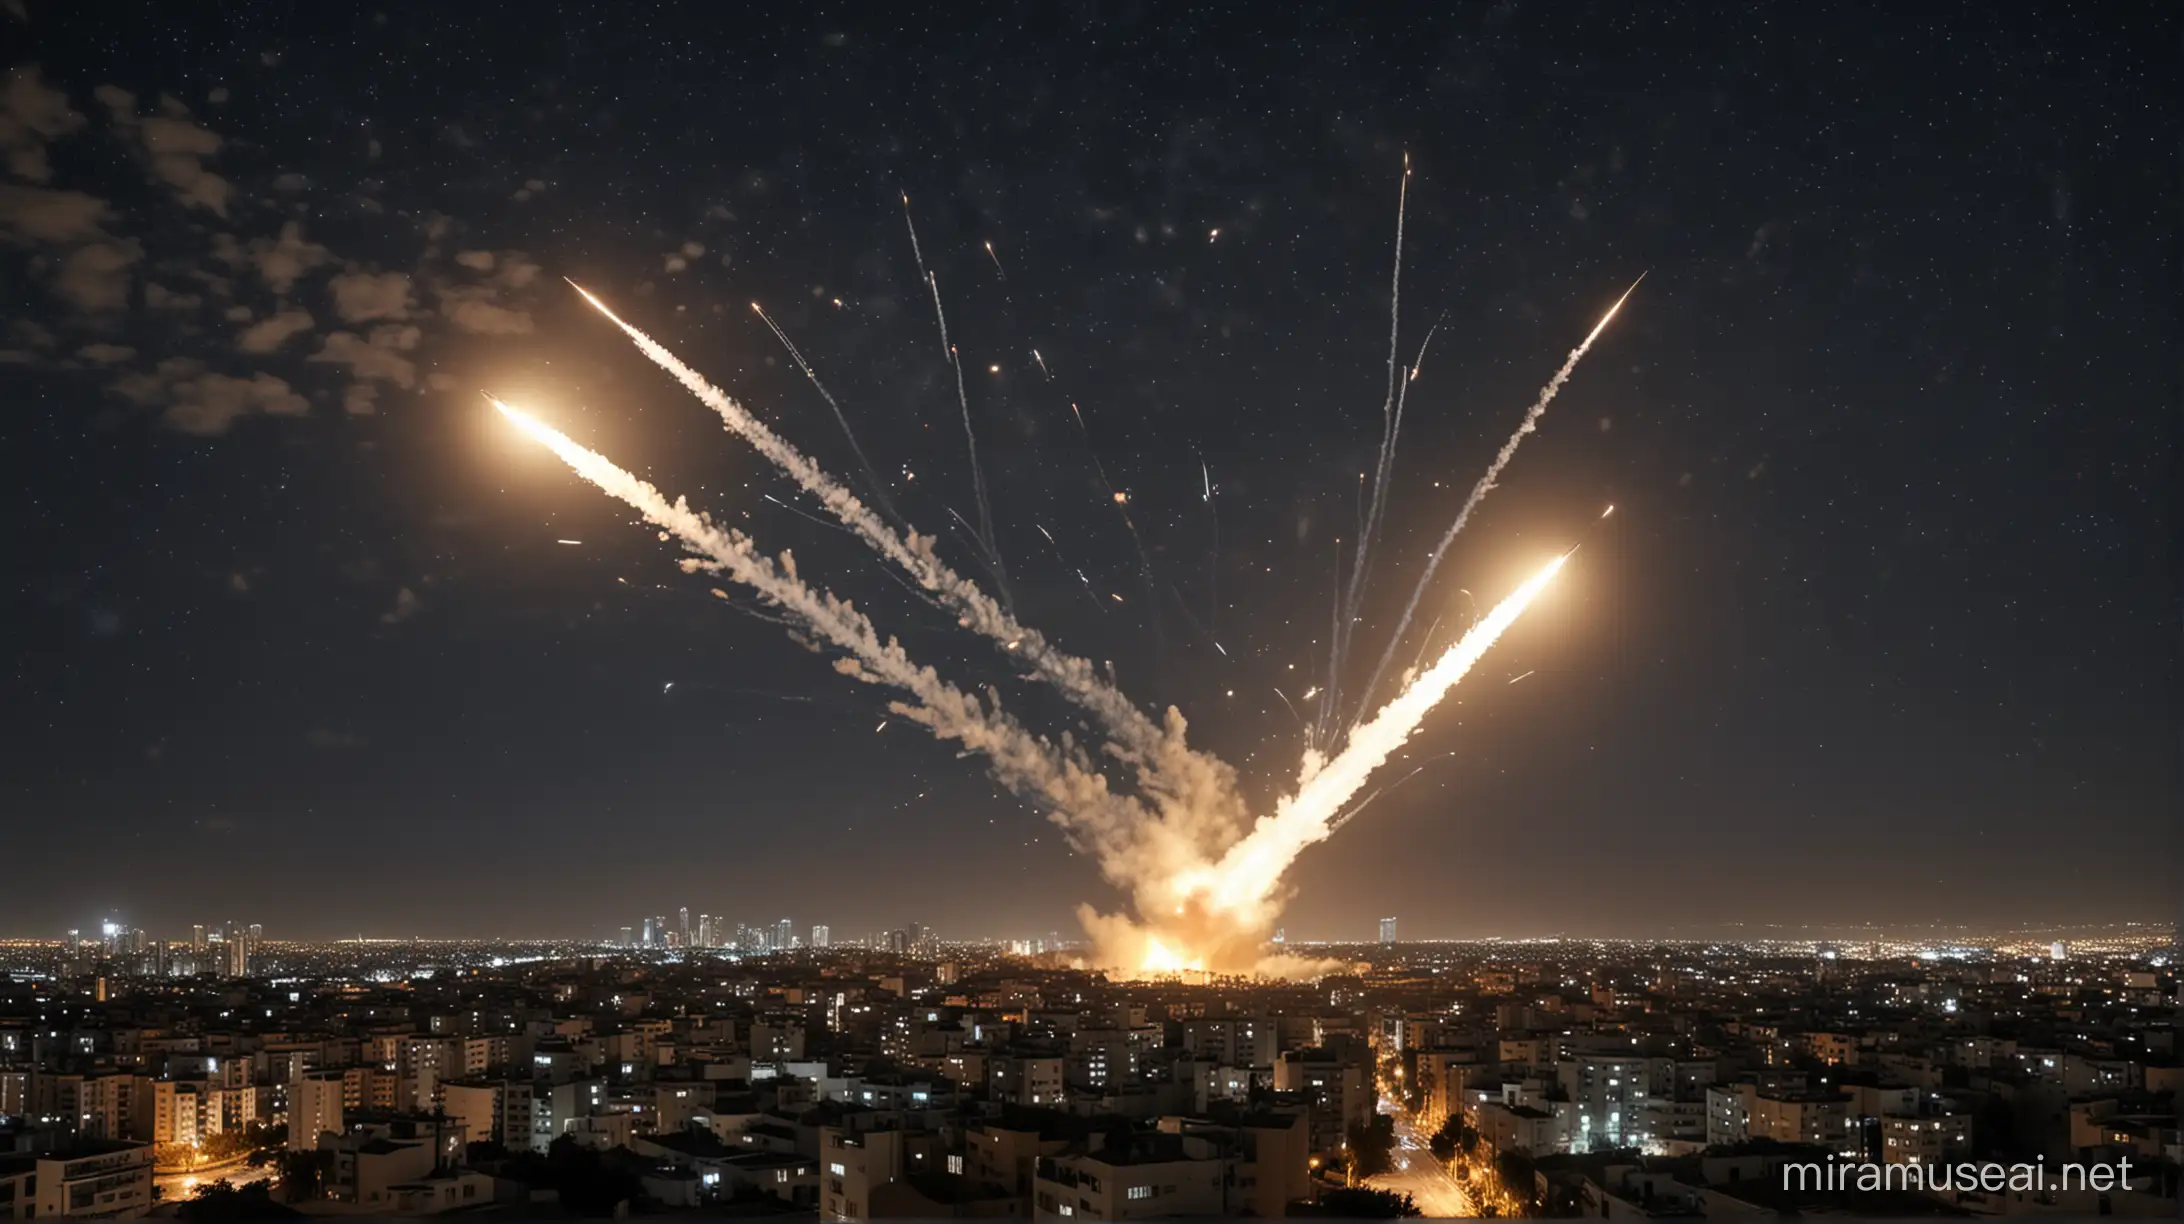 
Missiles intercepted in the air by anti-missiles of the iron dome, 21st century era, Israel, explosions in the night sky in the city of Tel Aviv capital of Israel, frontal, hyper-realistic, photo realism, cinematography